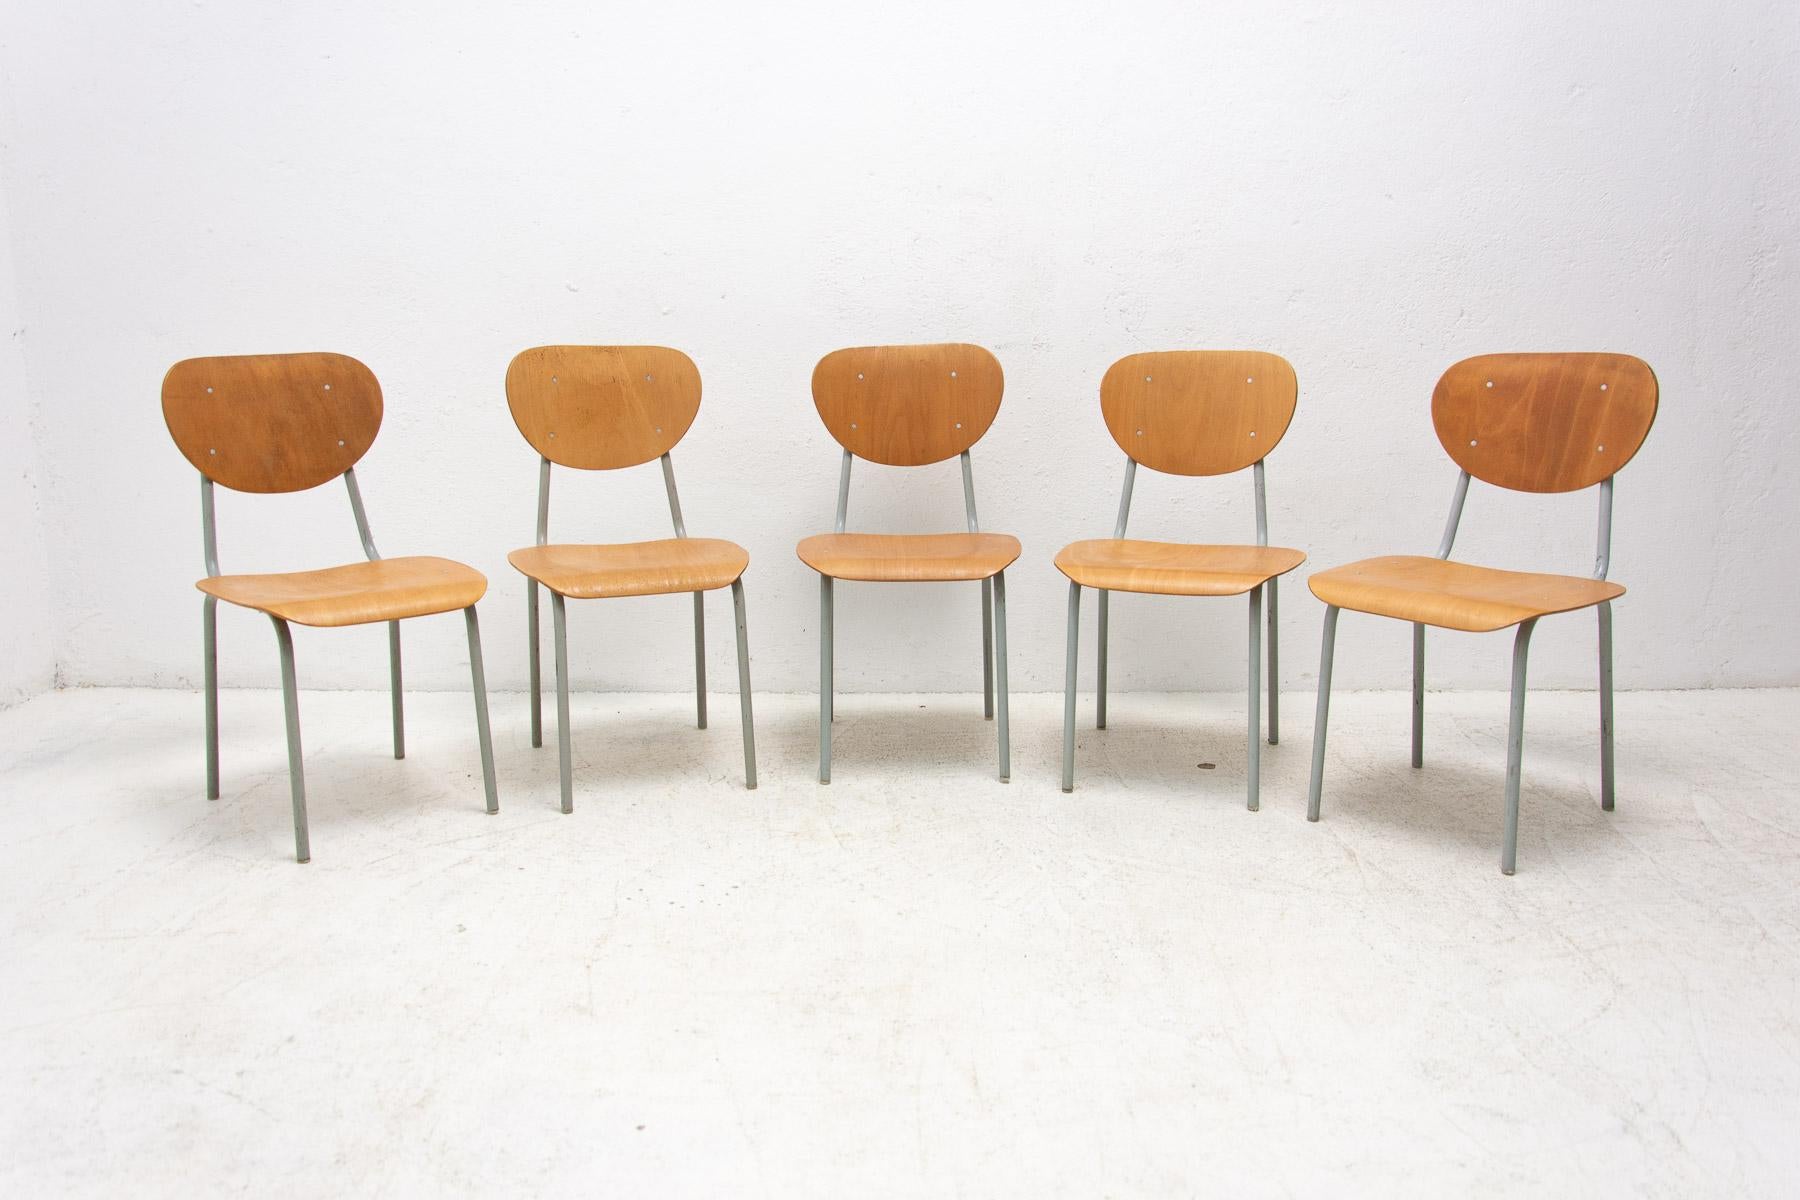 Vintage wooden and metal chairs, made in the former Czechoslovakia in the 1970s. They were used as school chairs at one of the Czechoslovak basic schools.

In good Vintage condition, without any damage, showing signs of age and using. Price is for